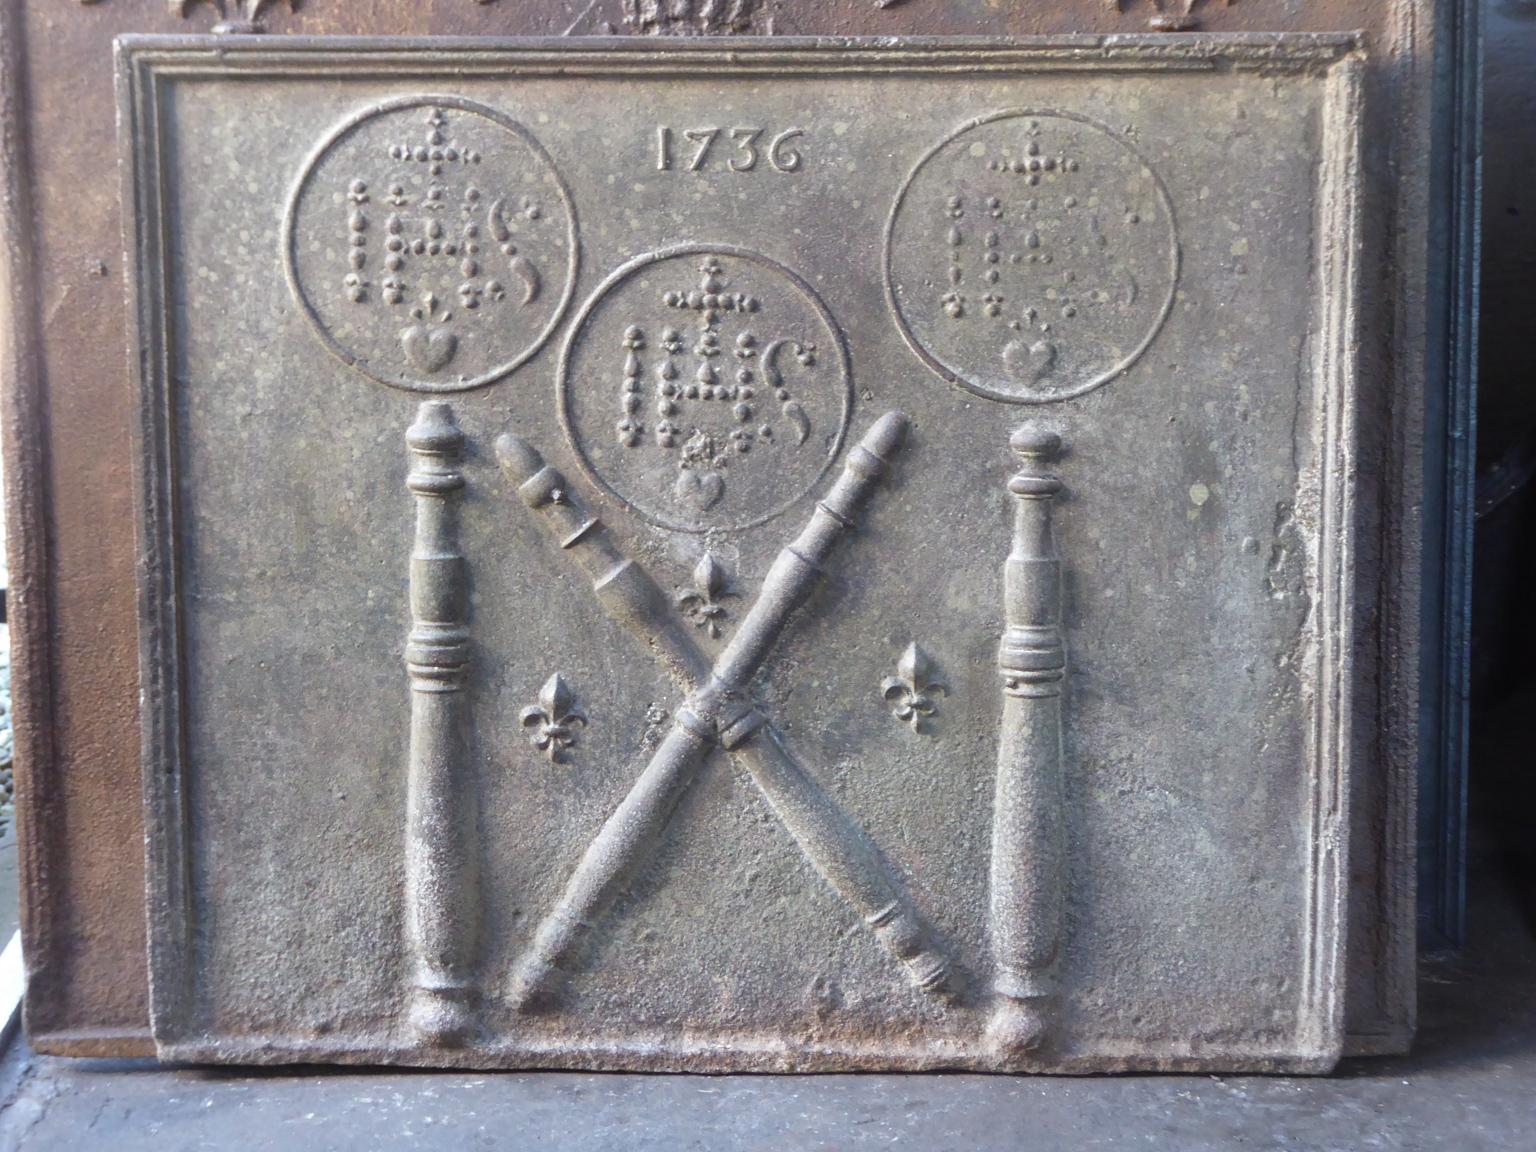 18th century Louis XIV French fireback with pillars, three IHS monograms, and the date of production 1736.

The monogram IHS stands for Iesus Hominum Salvator (Jesus the Savior of Humanity) or In Hoc Signo (In this sign will you win). The pillars